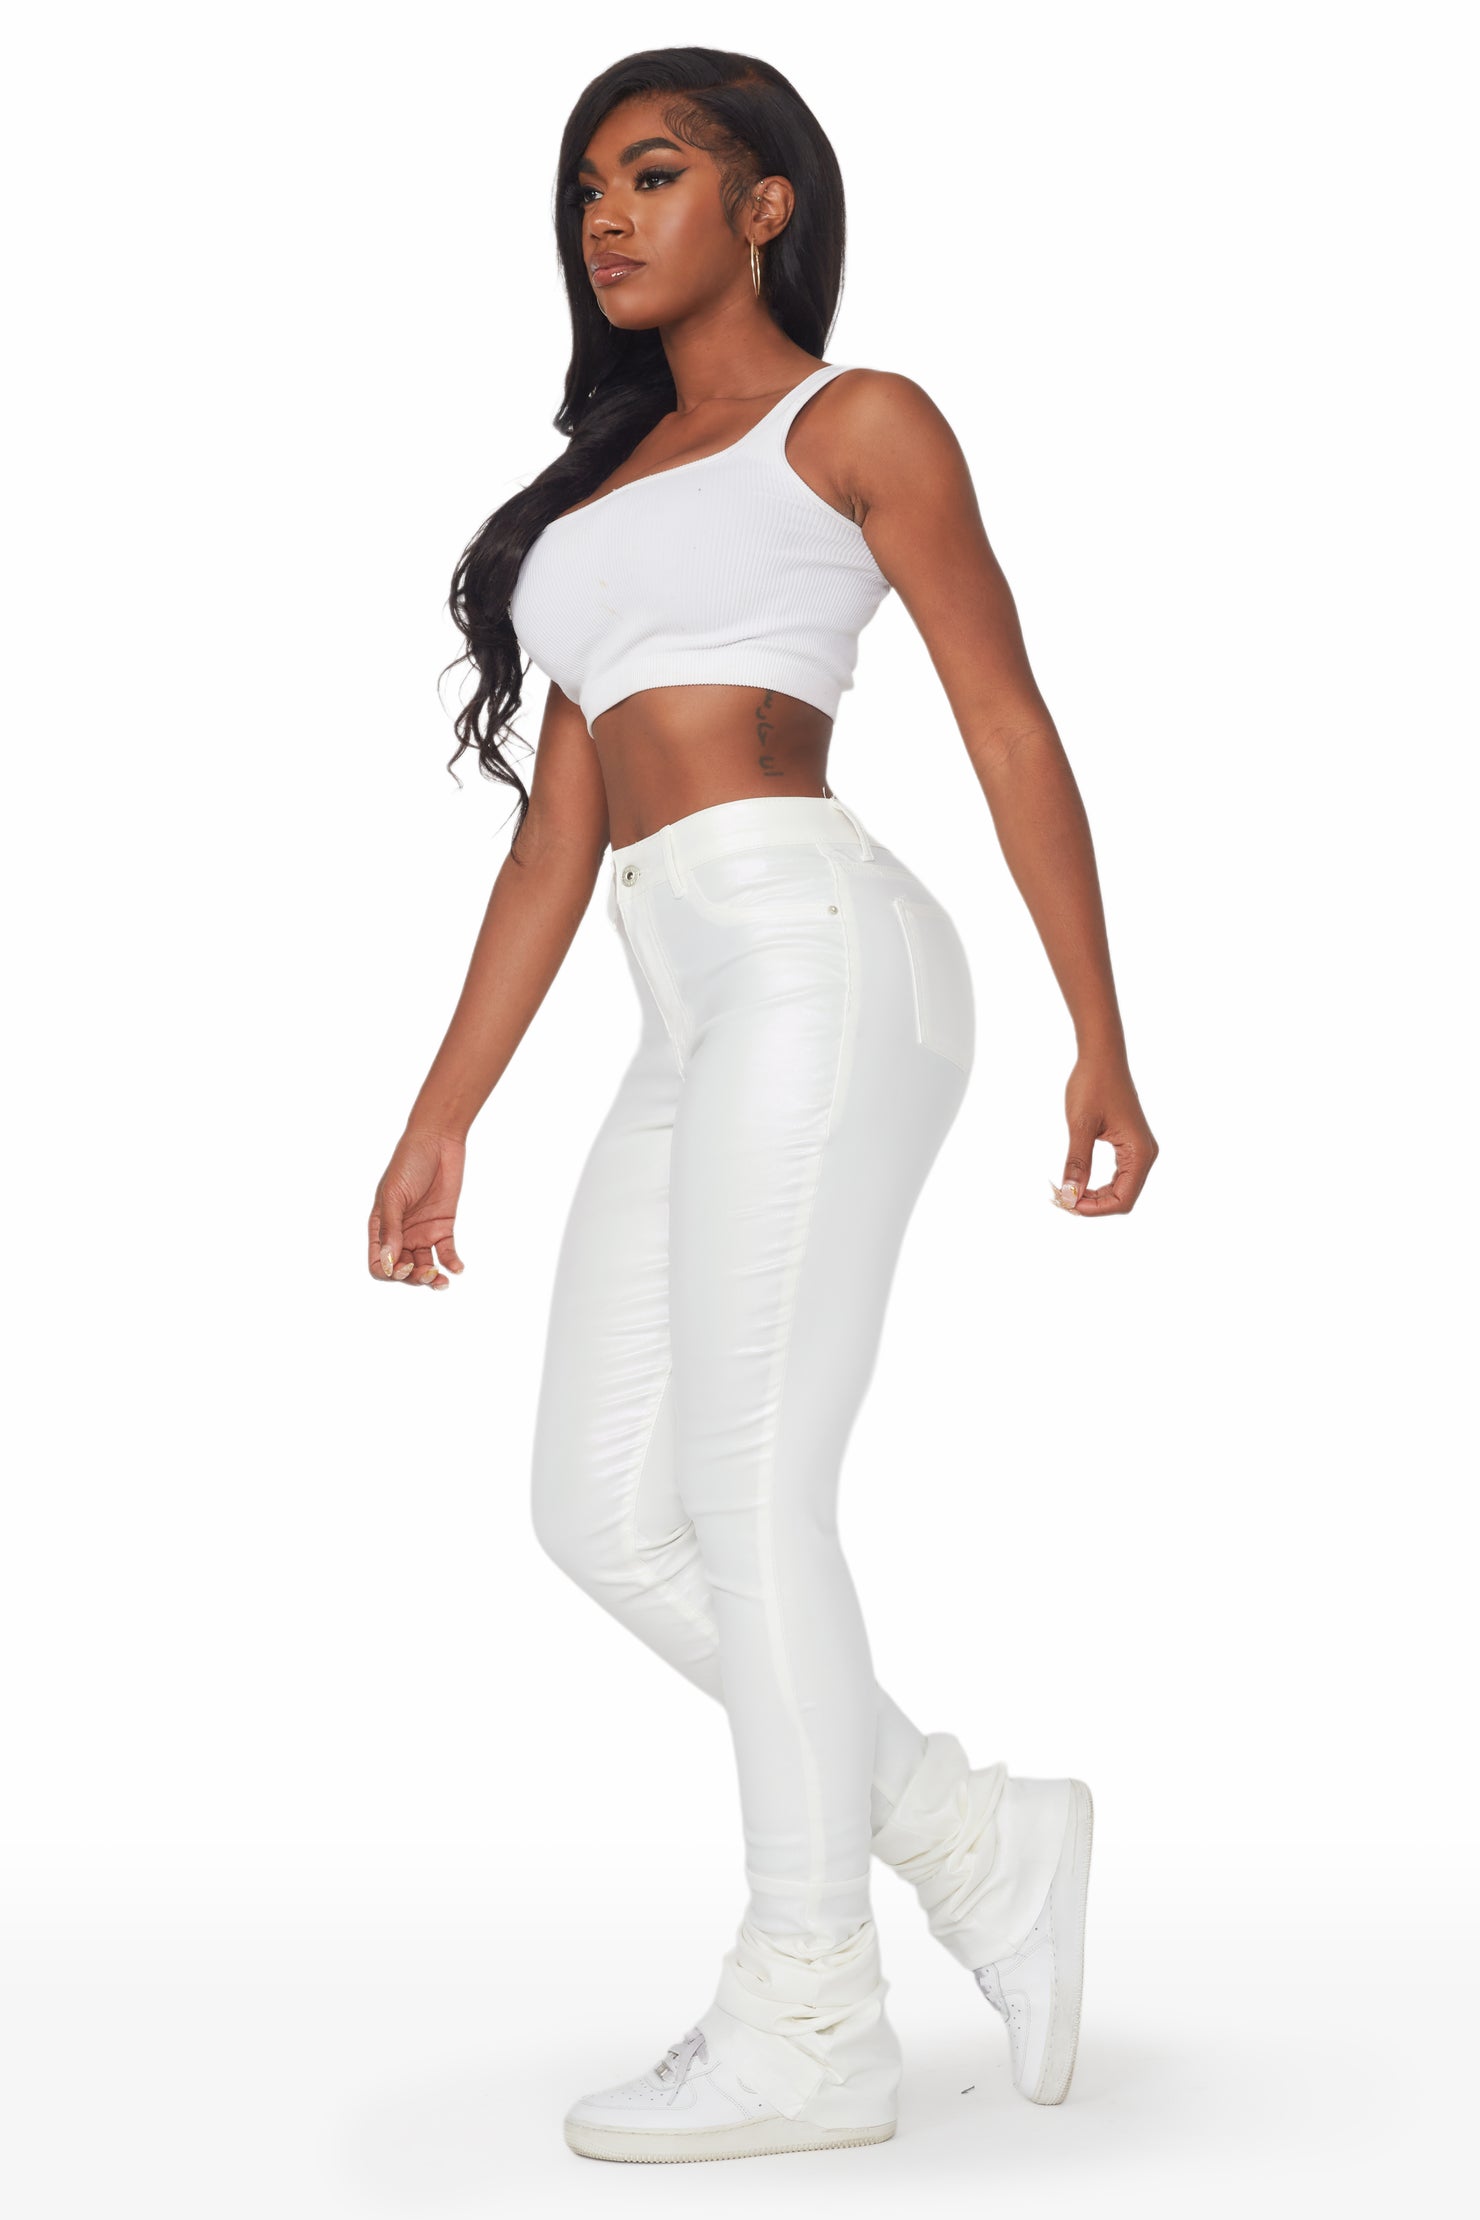 white stacked pants – Herperfection